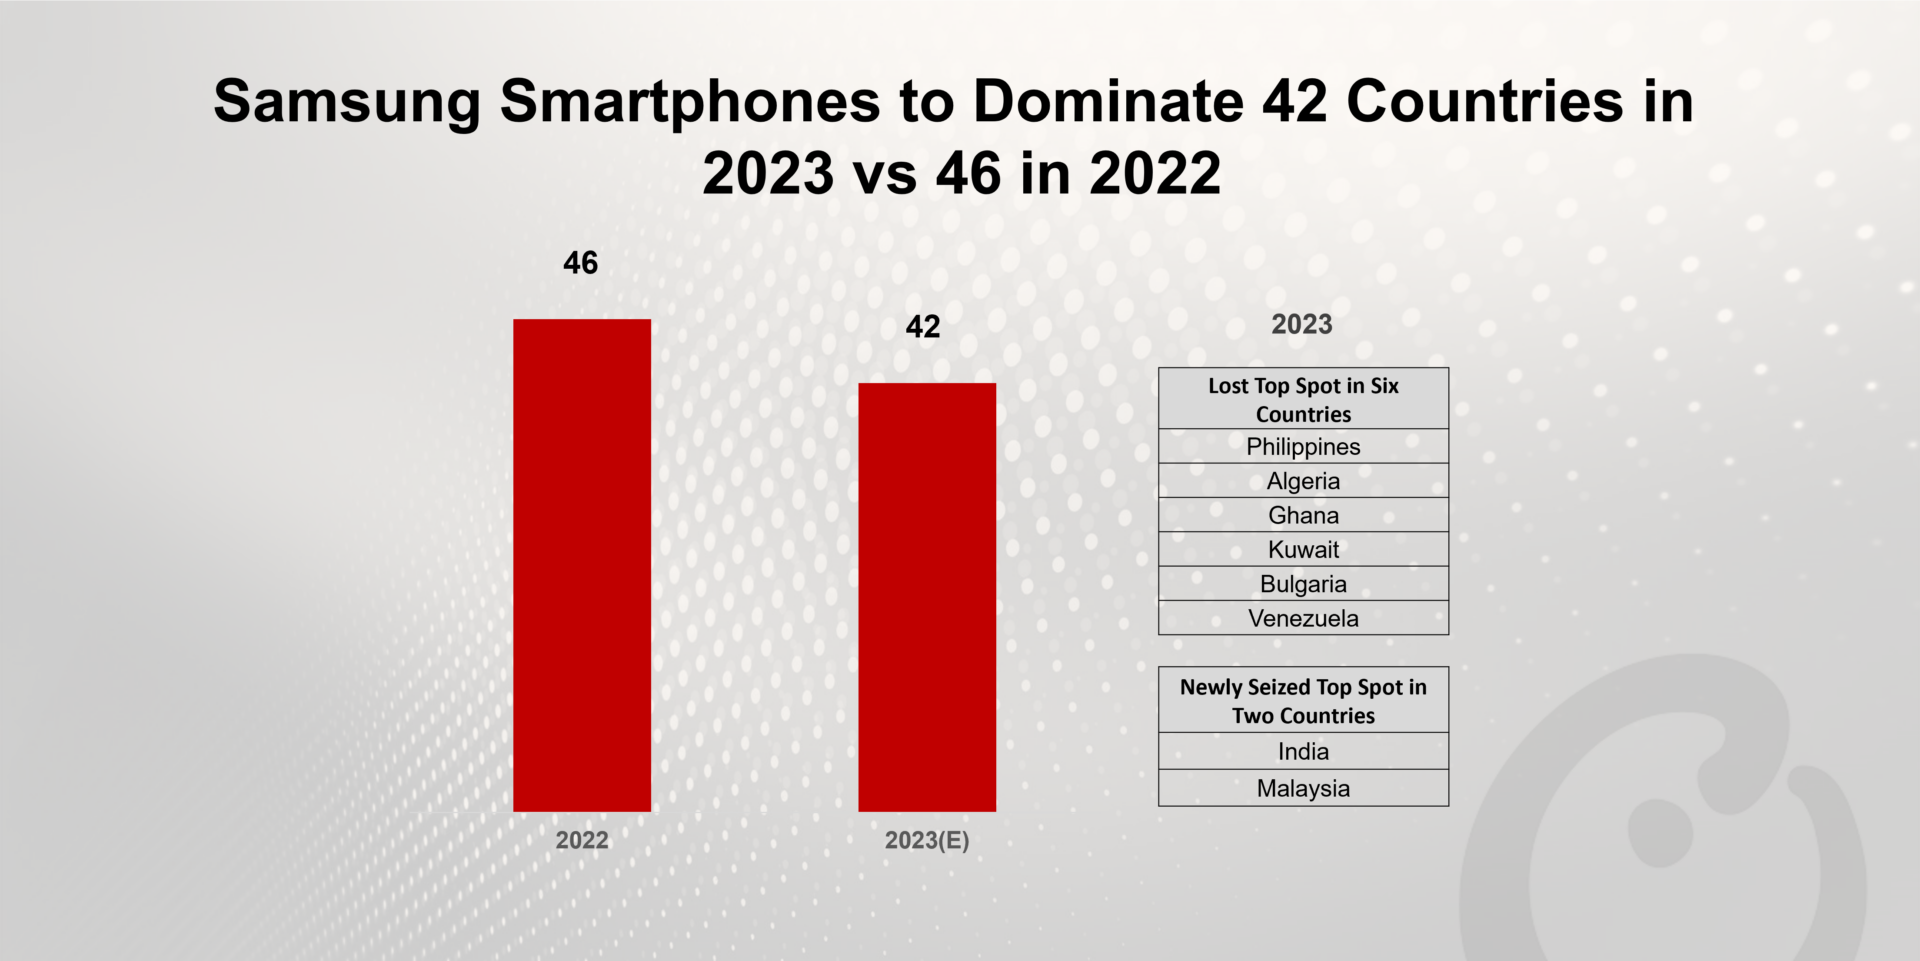 Samsung Smartphones to Dominate 42 Countries in 2023 vs 46 in 2022